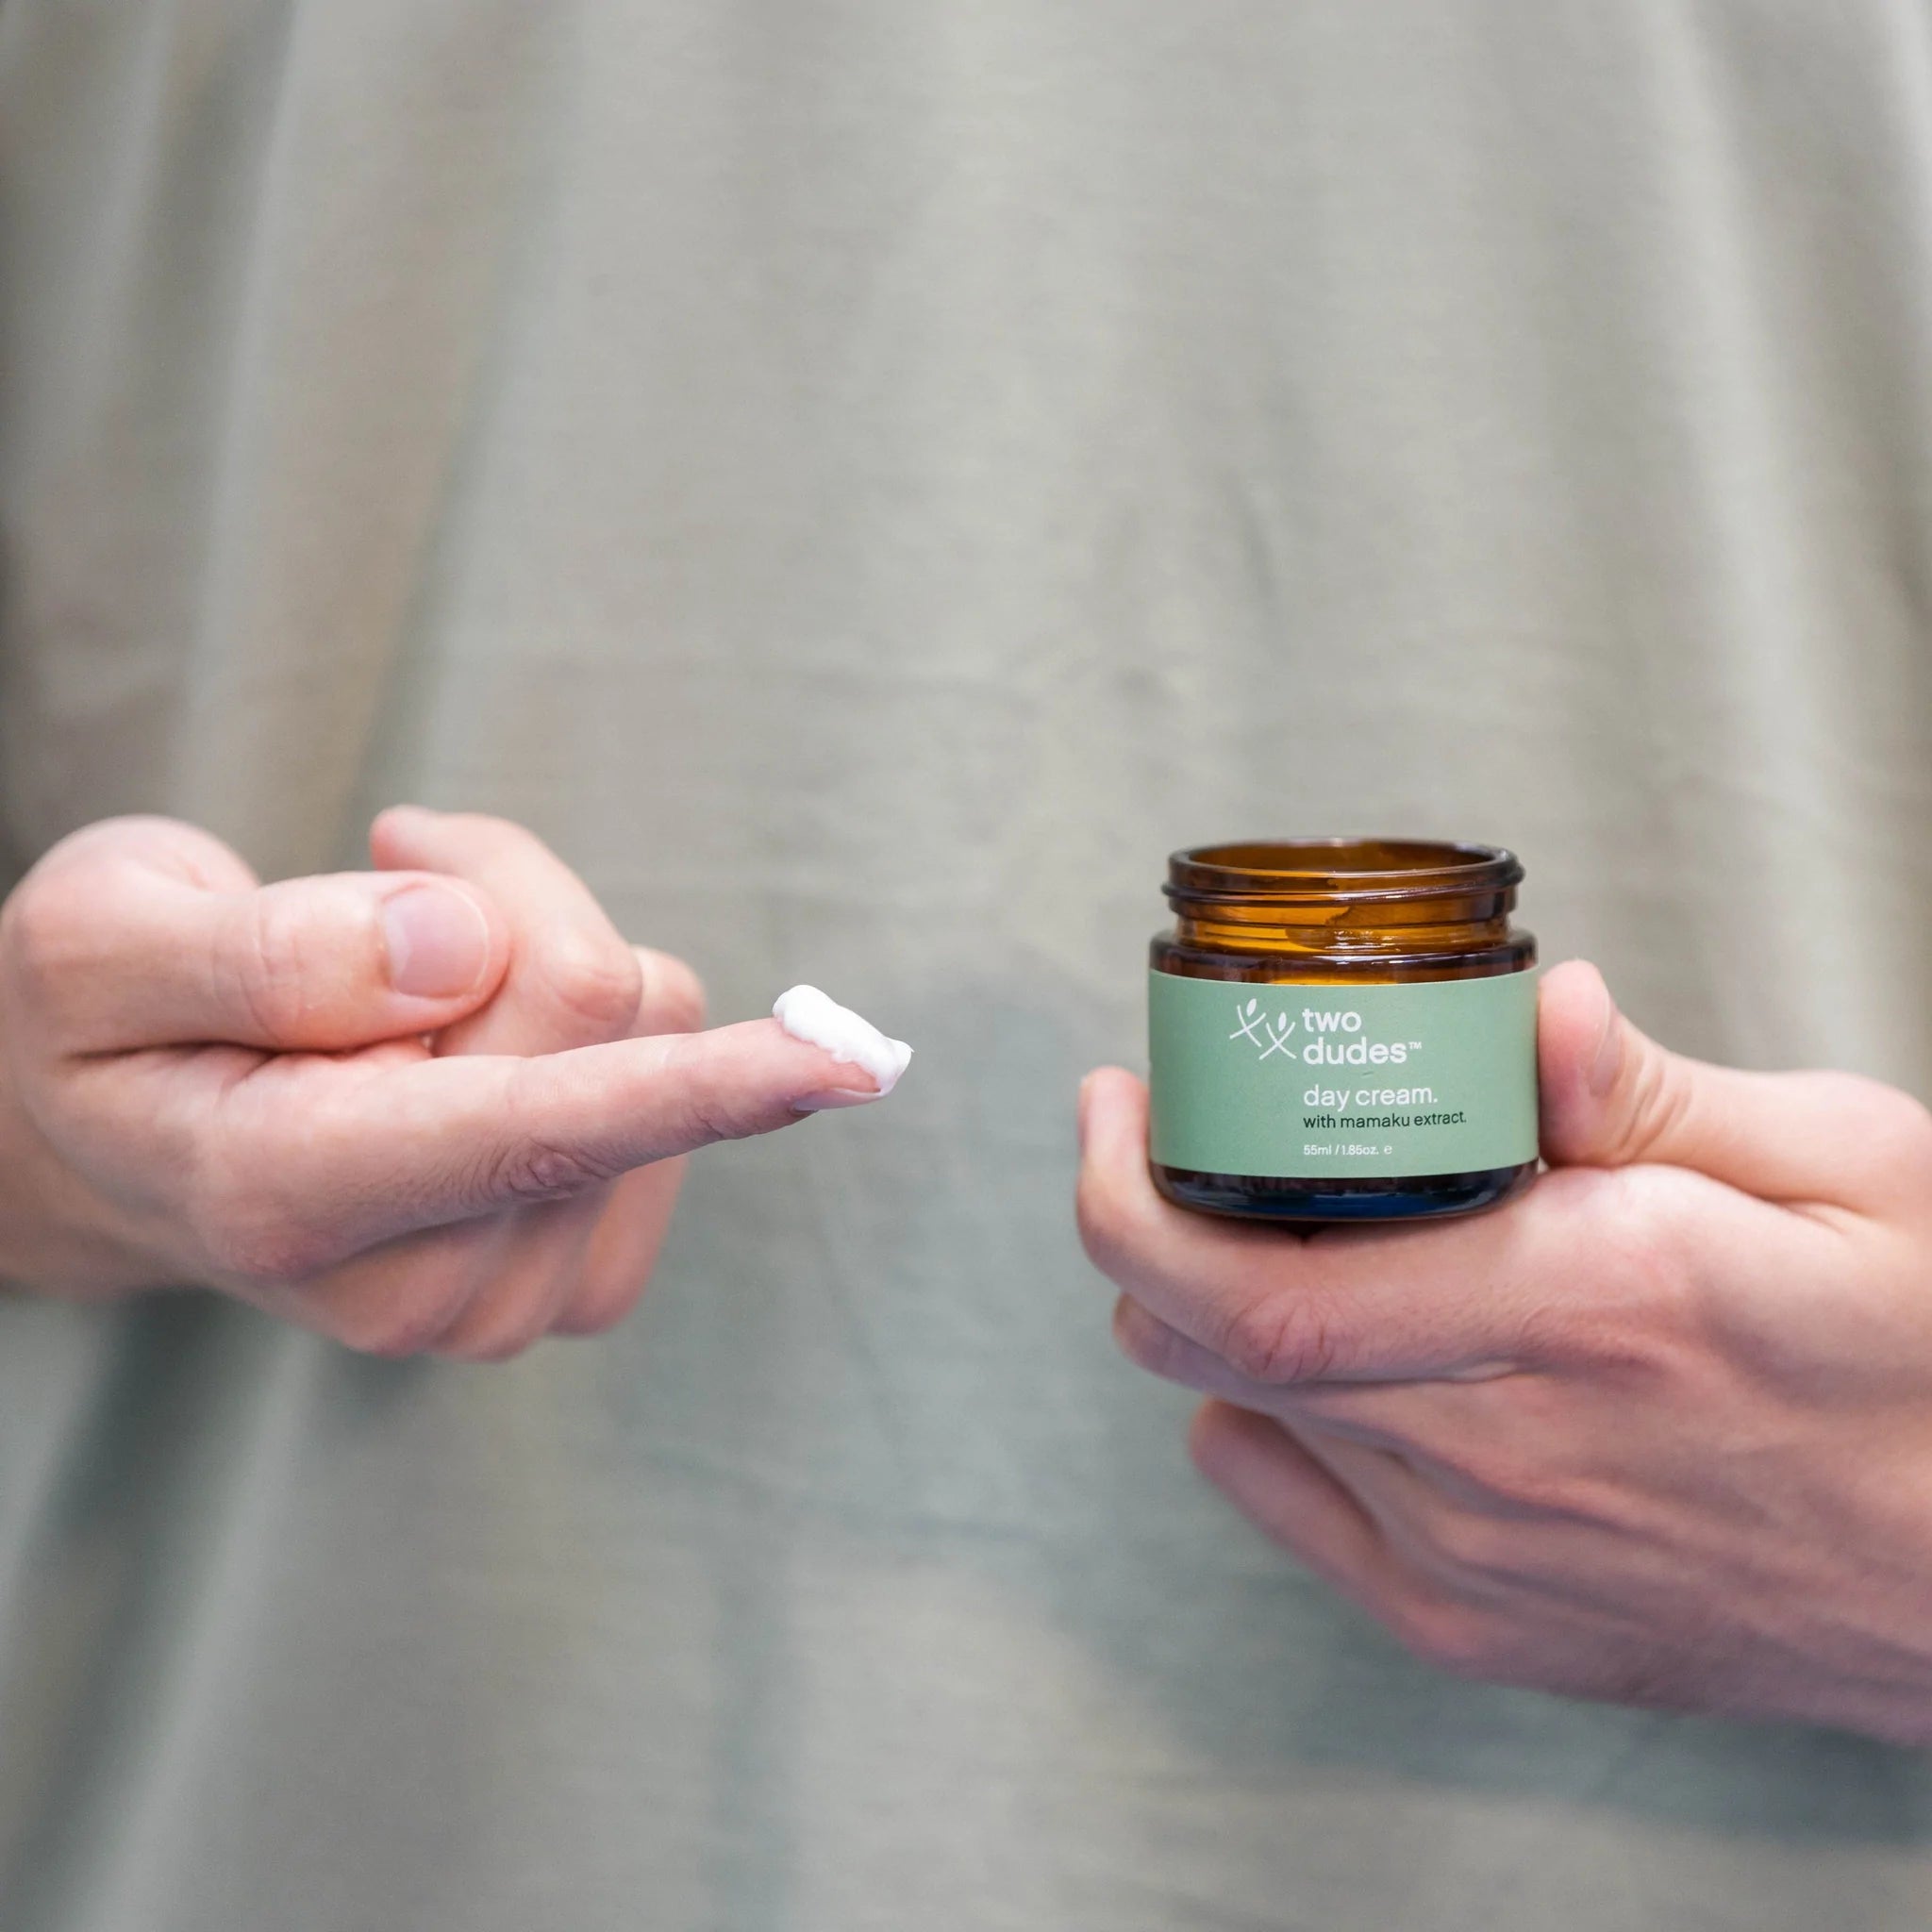 A person holding a jar of "Day Cream by Two Dudes" skin protection day cream in one hand with a dab of the cream on the index finger of the other hand, ready for application.